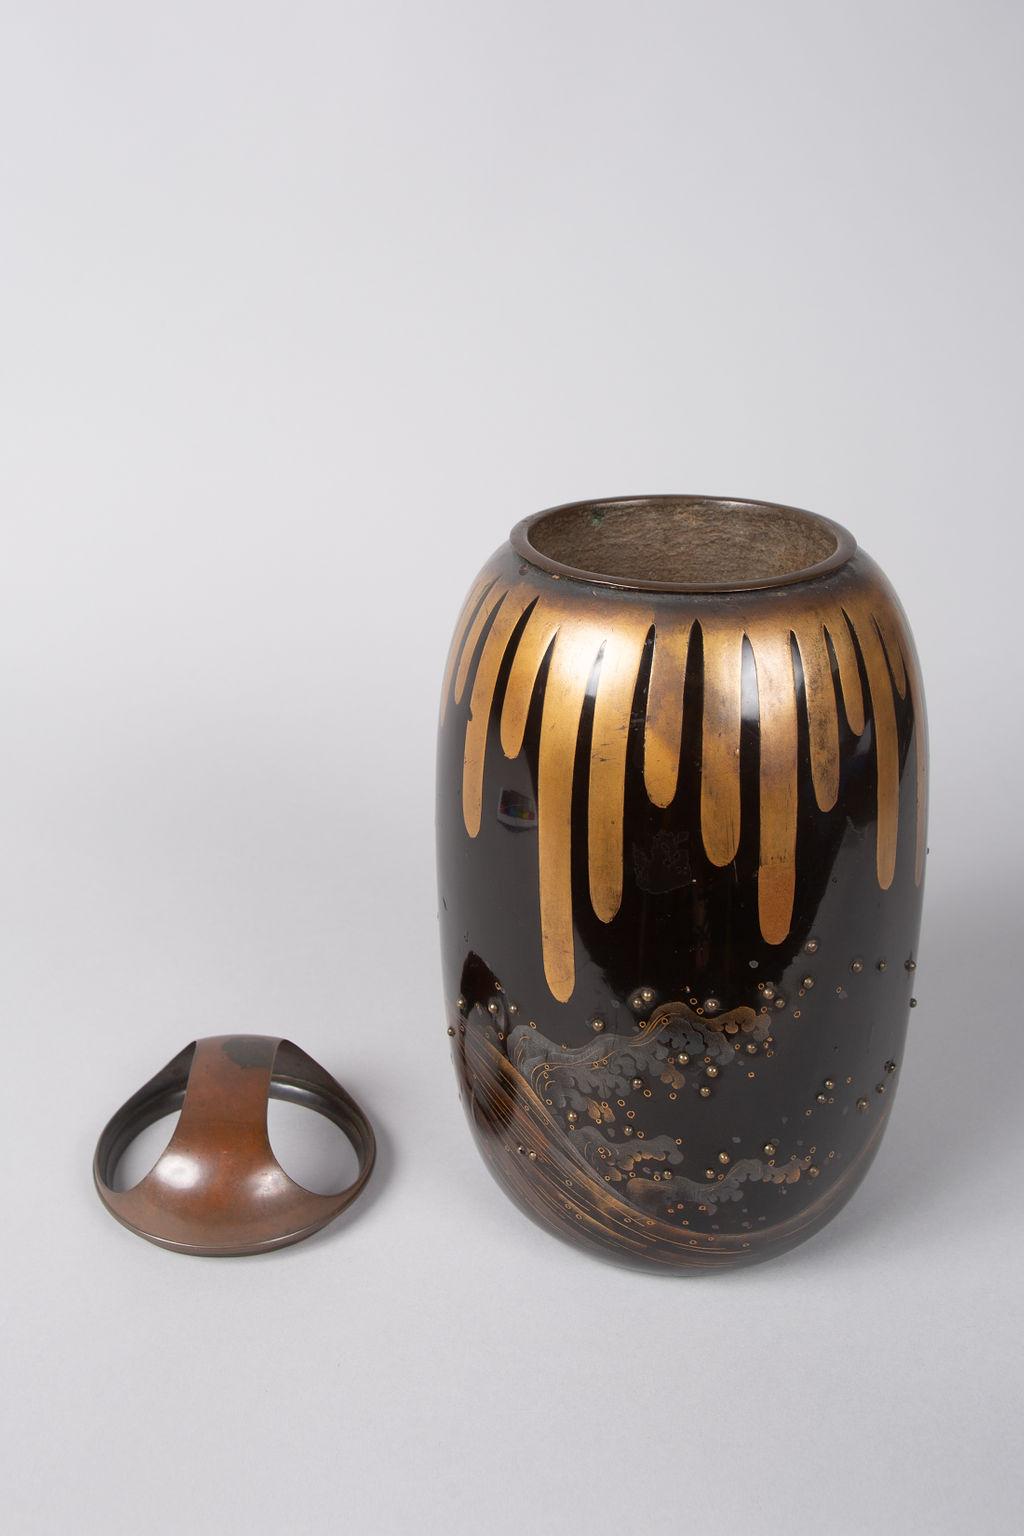 19th Century Japanese Lacquer Koro 'Incense Burner' For Sale